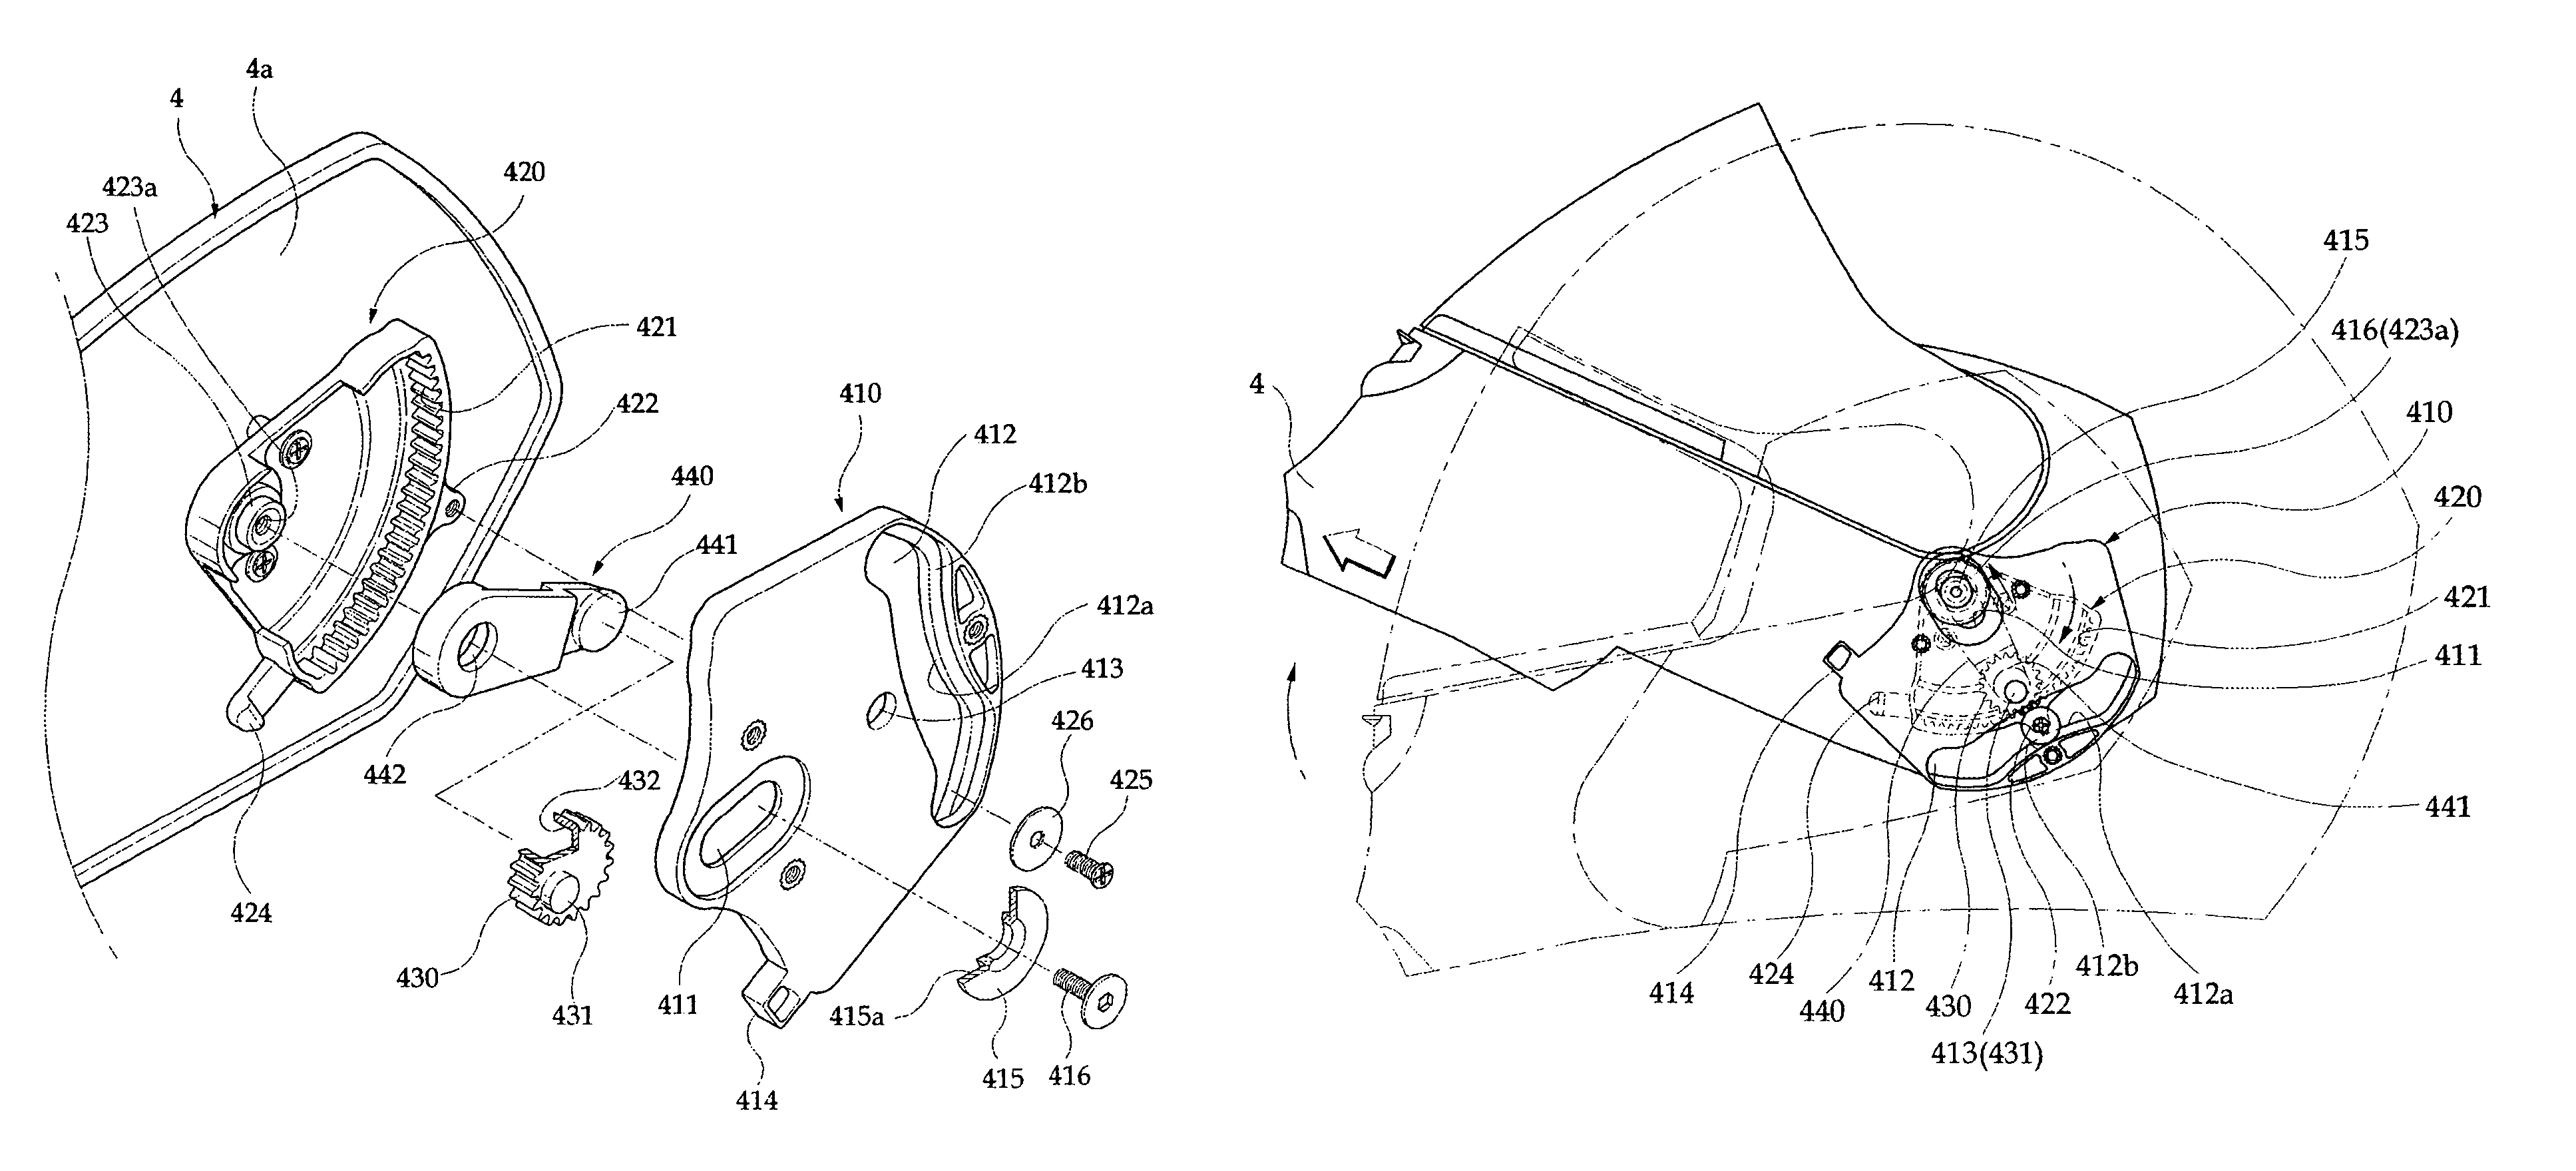 Device for opening-closing jaw guard of helmet